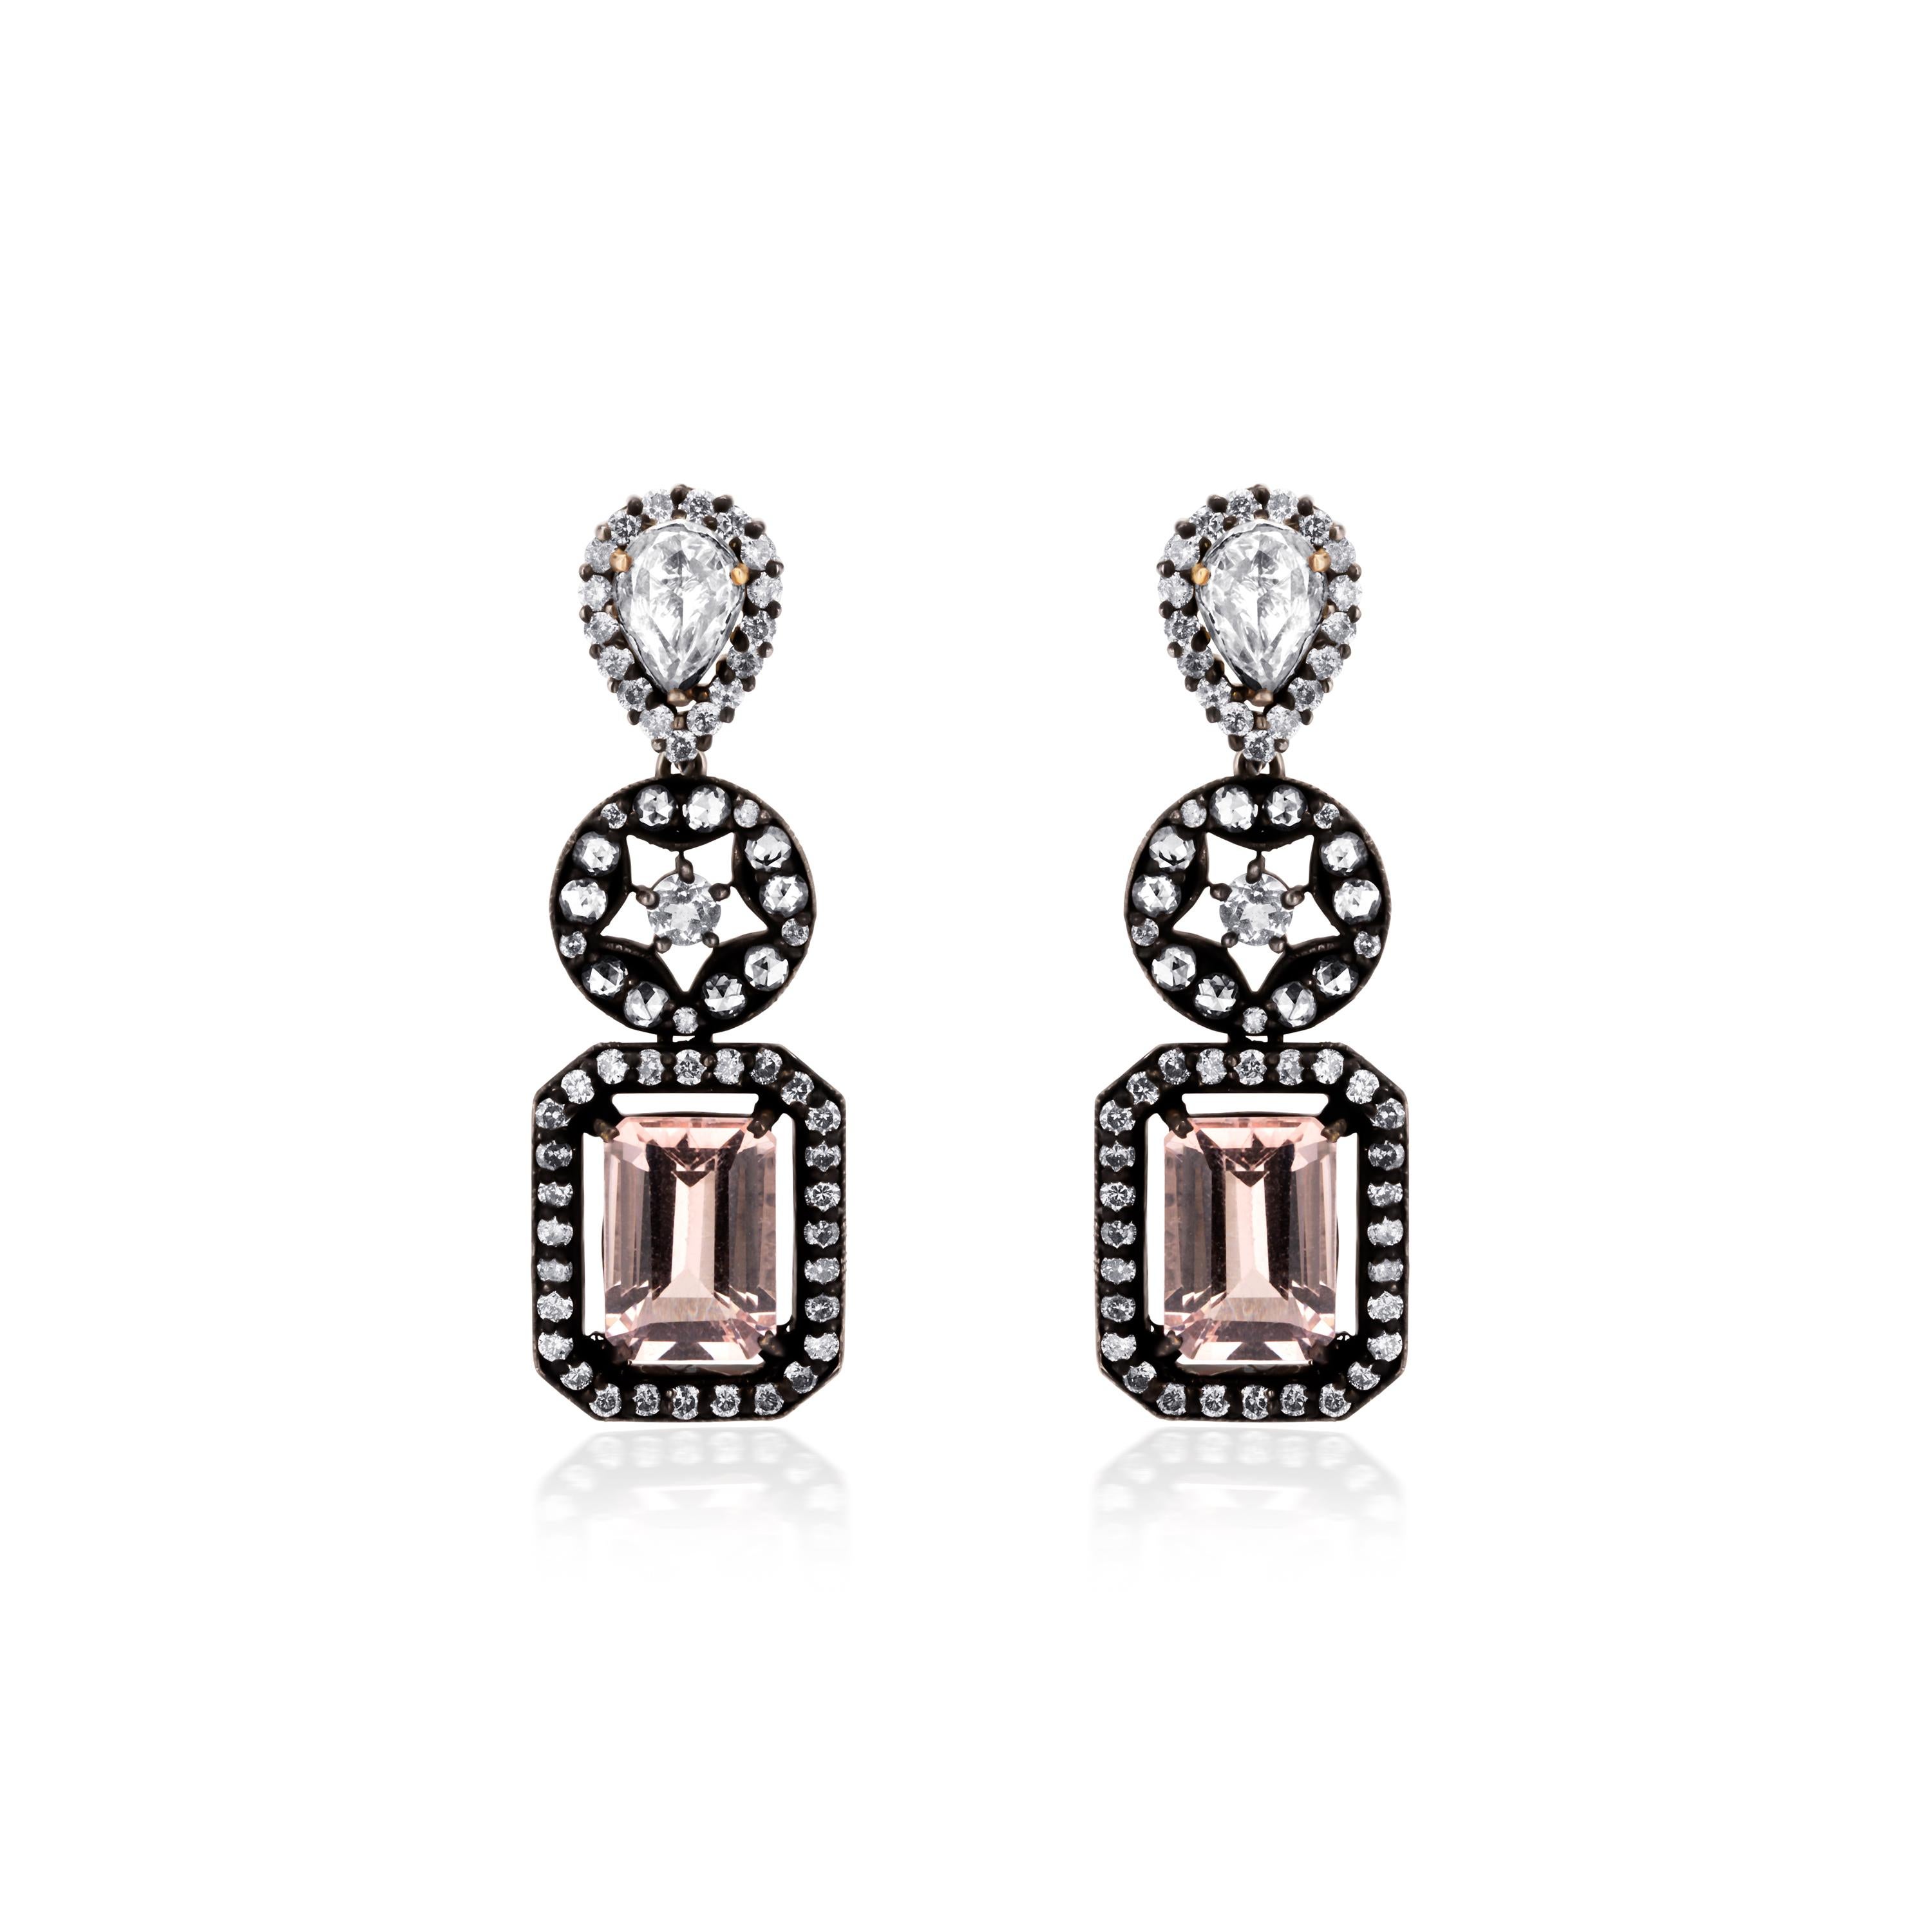 These magnificent Victorian drops, crafted in 18K gold and 925 sterling silver, each feature a graduating trio of differently shaped frames that culminates with gleaming morganites, weighing 5.39Cts stationed in a pierced frame of diamonds. The